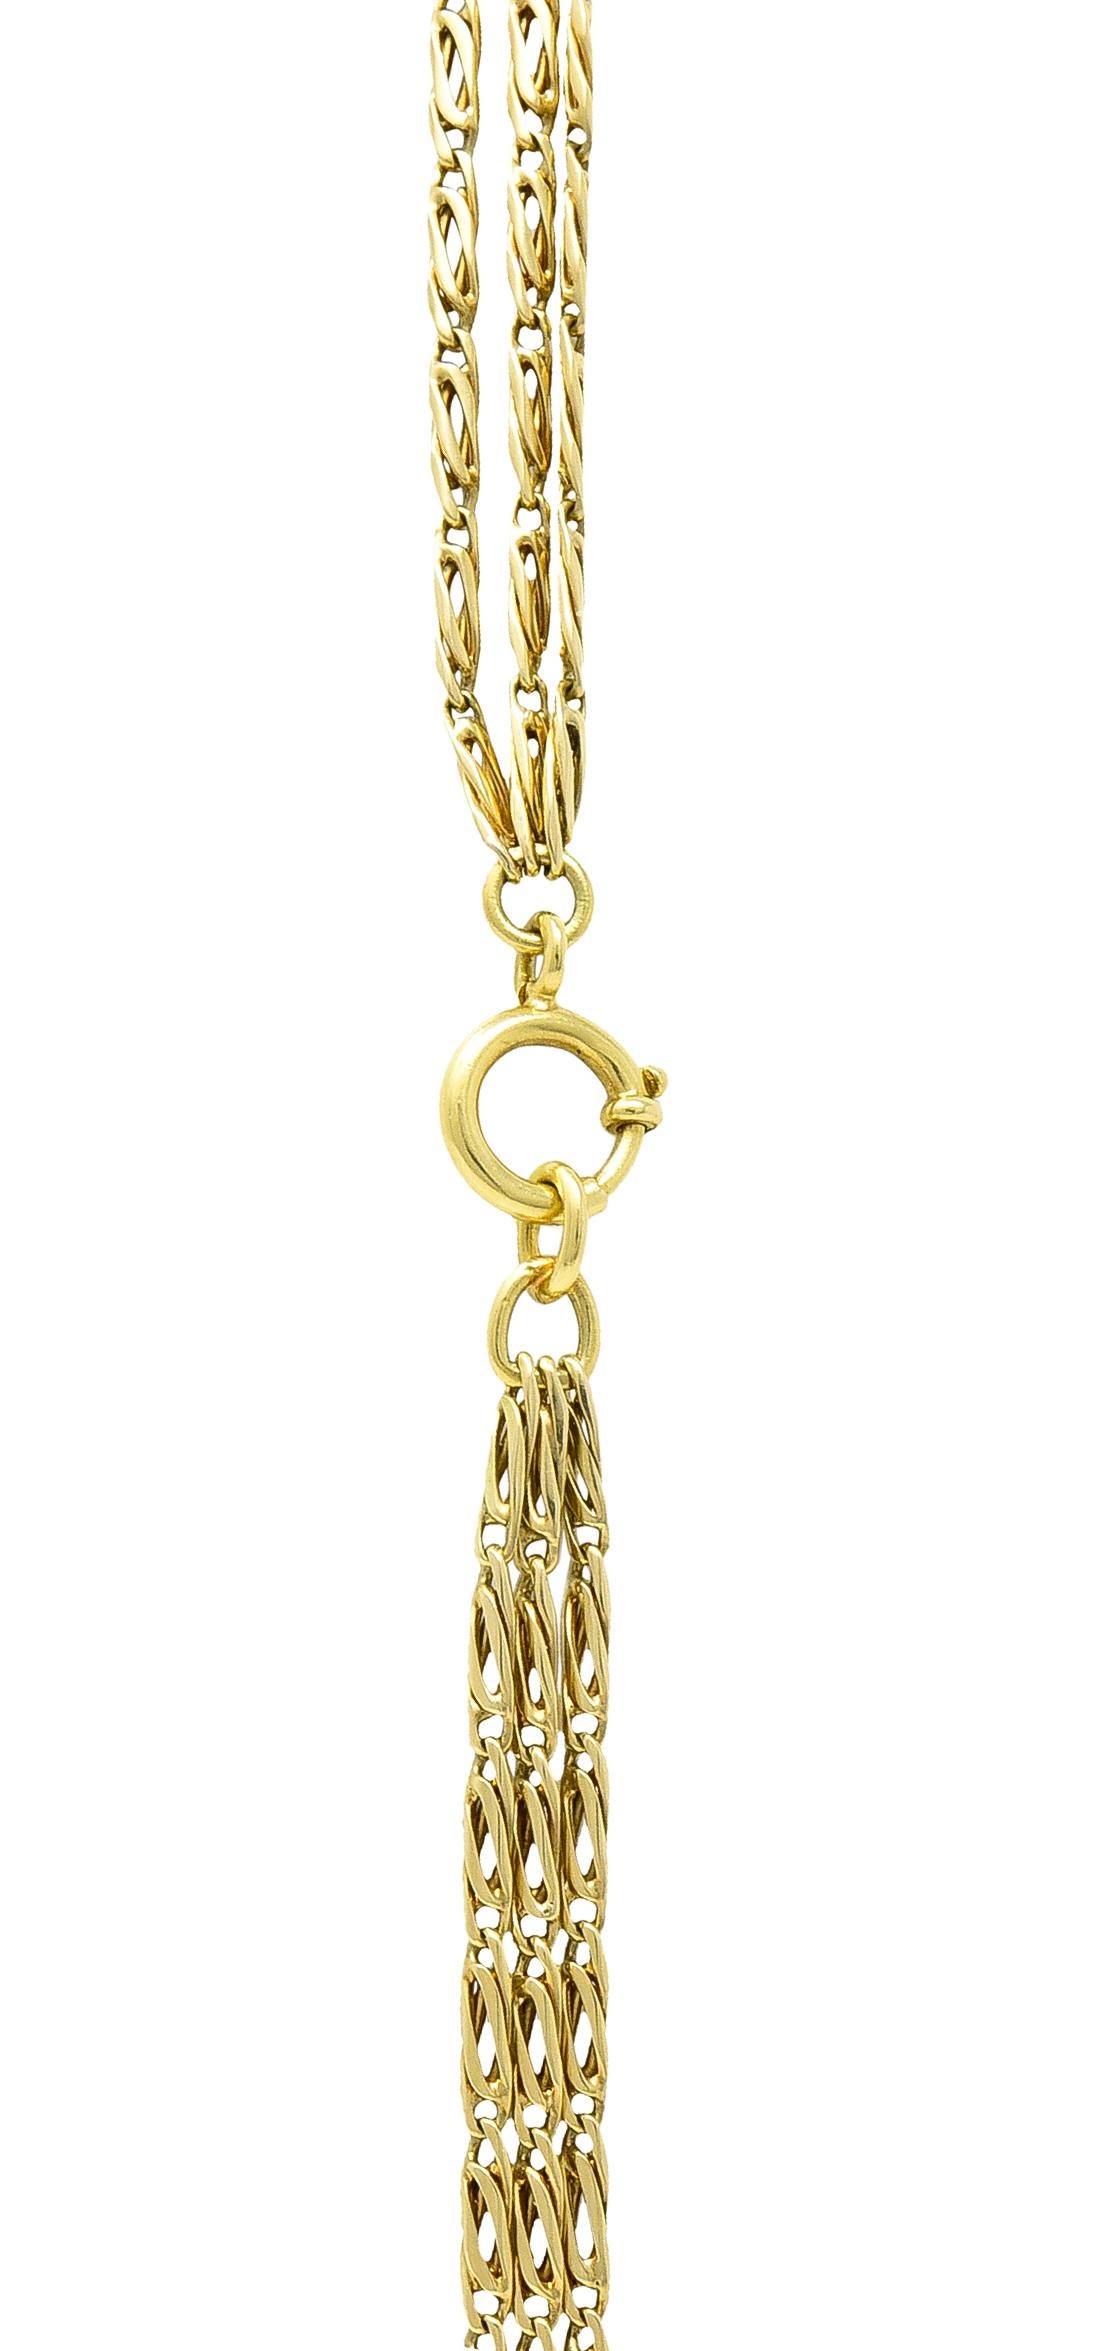 1980s 18 Karat Yellow Gold Three Stand Scroll Link Vintage Chain Necklace For Sale 2